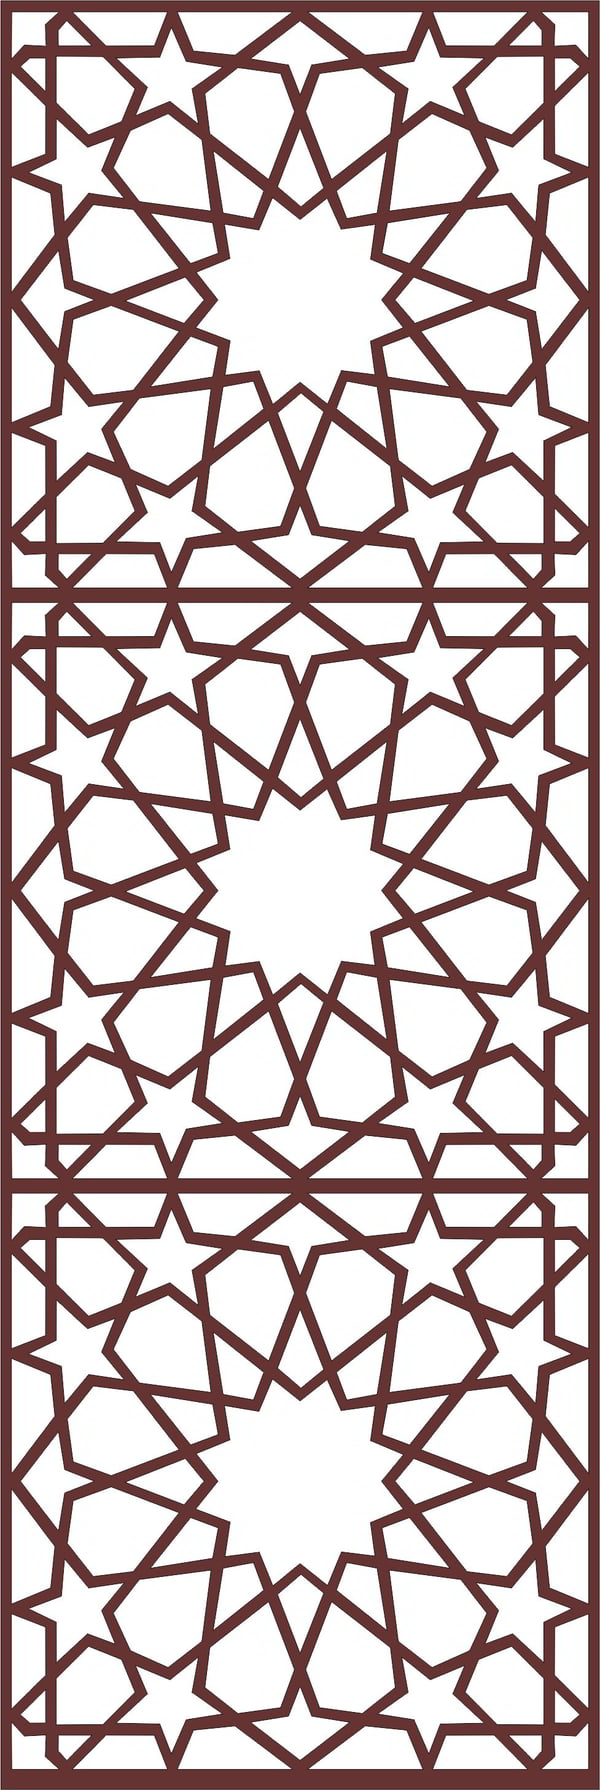 Laser Cut Decor Seamless Floral Grill Design Download Free Vector